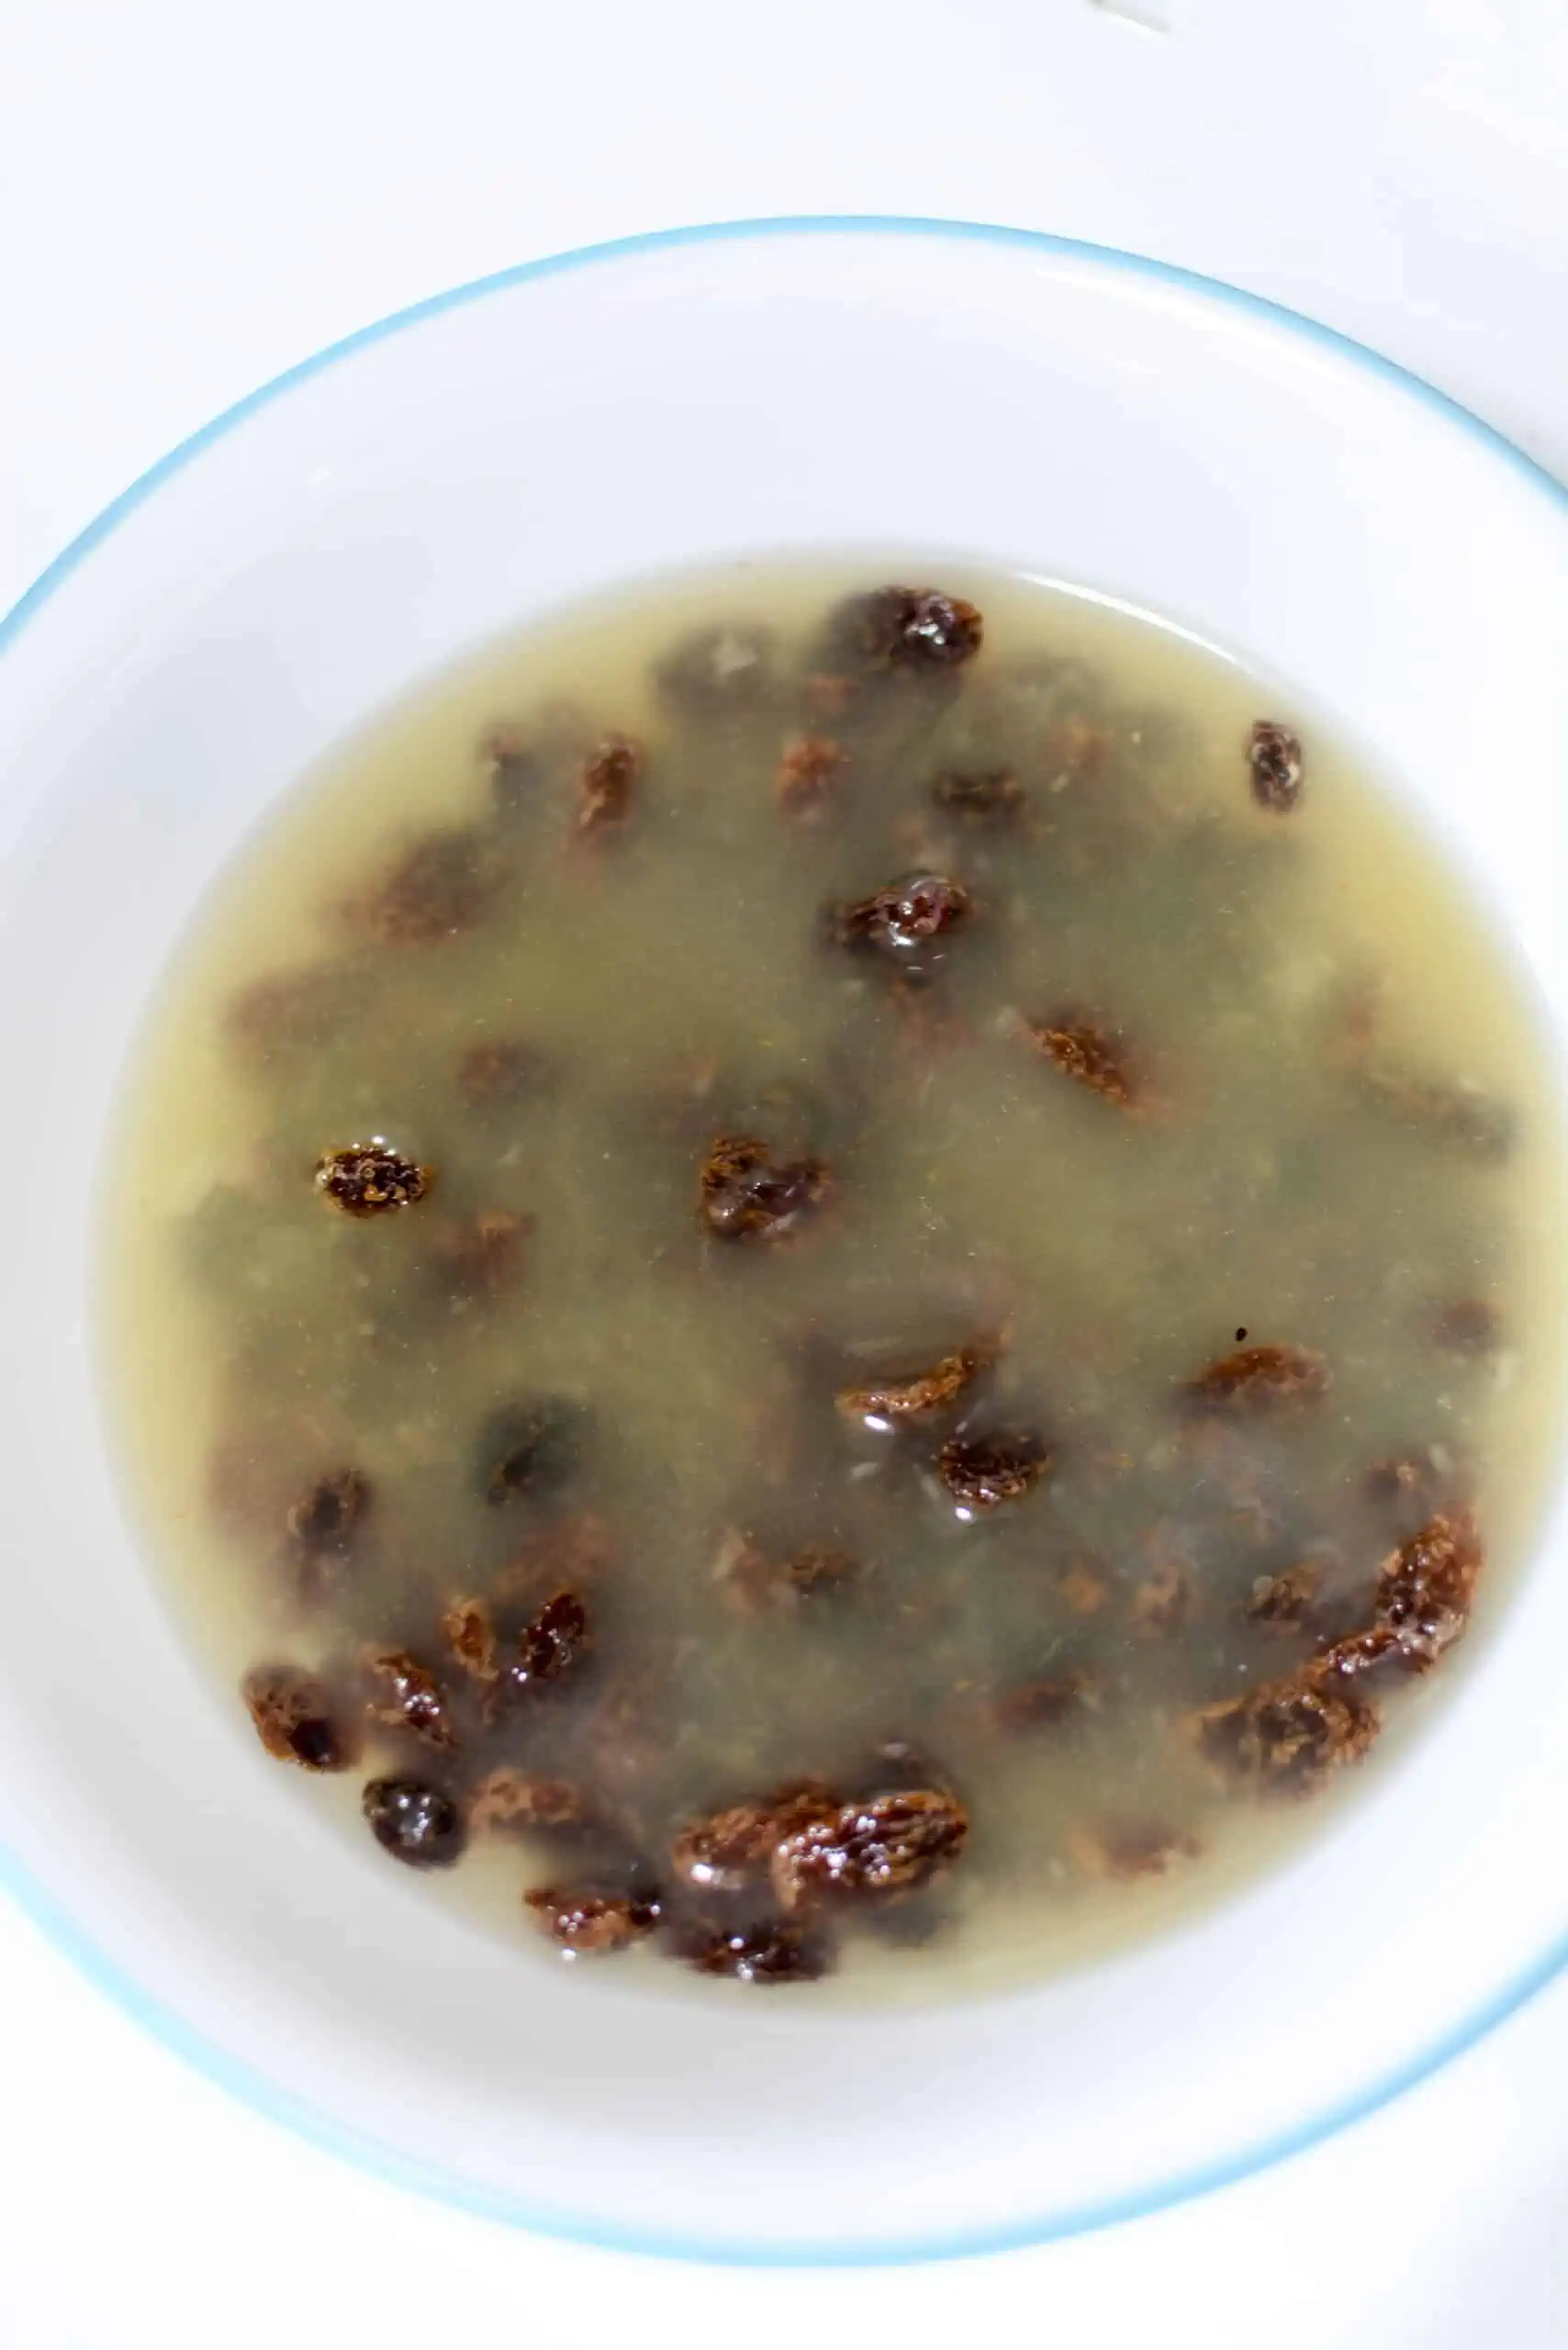 Raisins soaking in the reserved pineapple juice in a white bowl. 